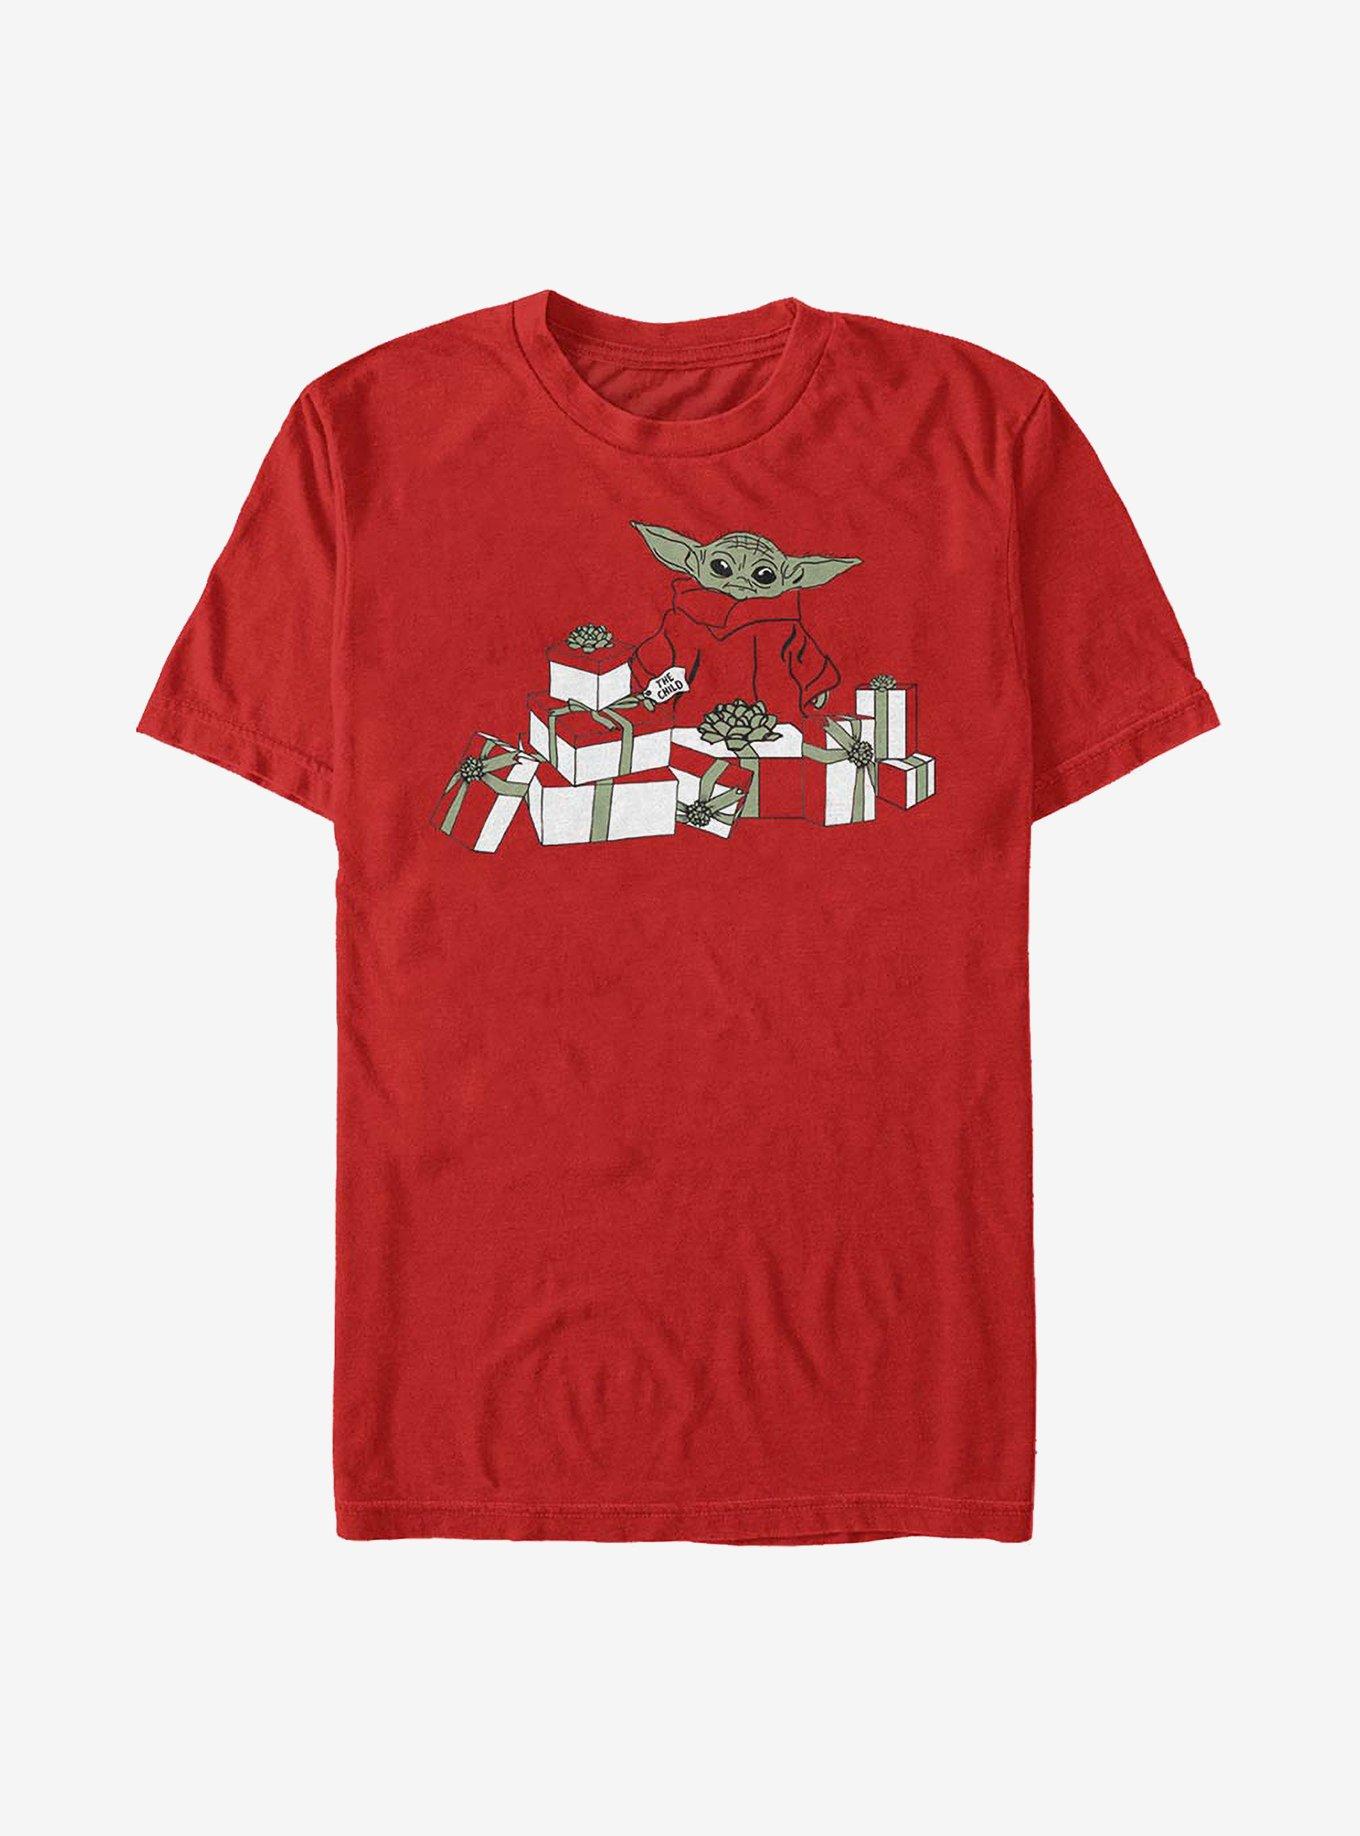 Star Wars The Mandalorian The Child Holiday T-Shirt, RED, hi-res